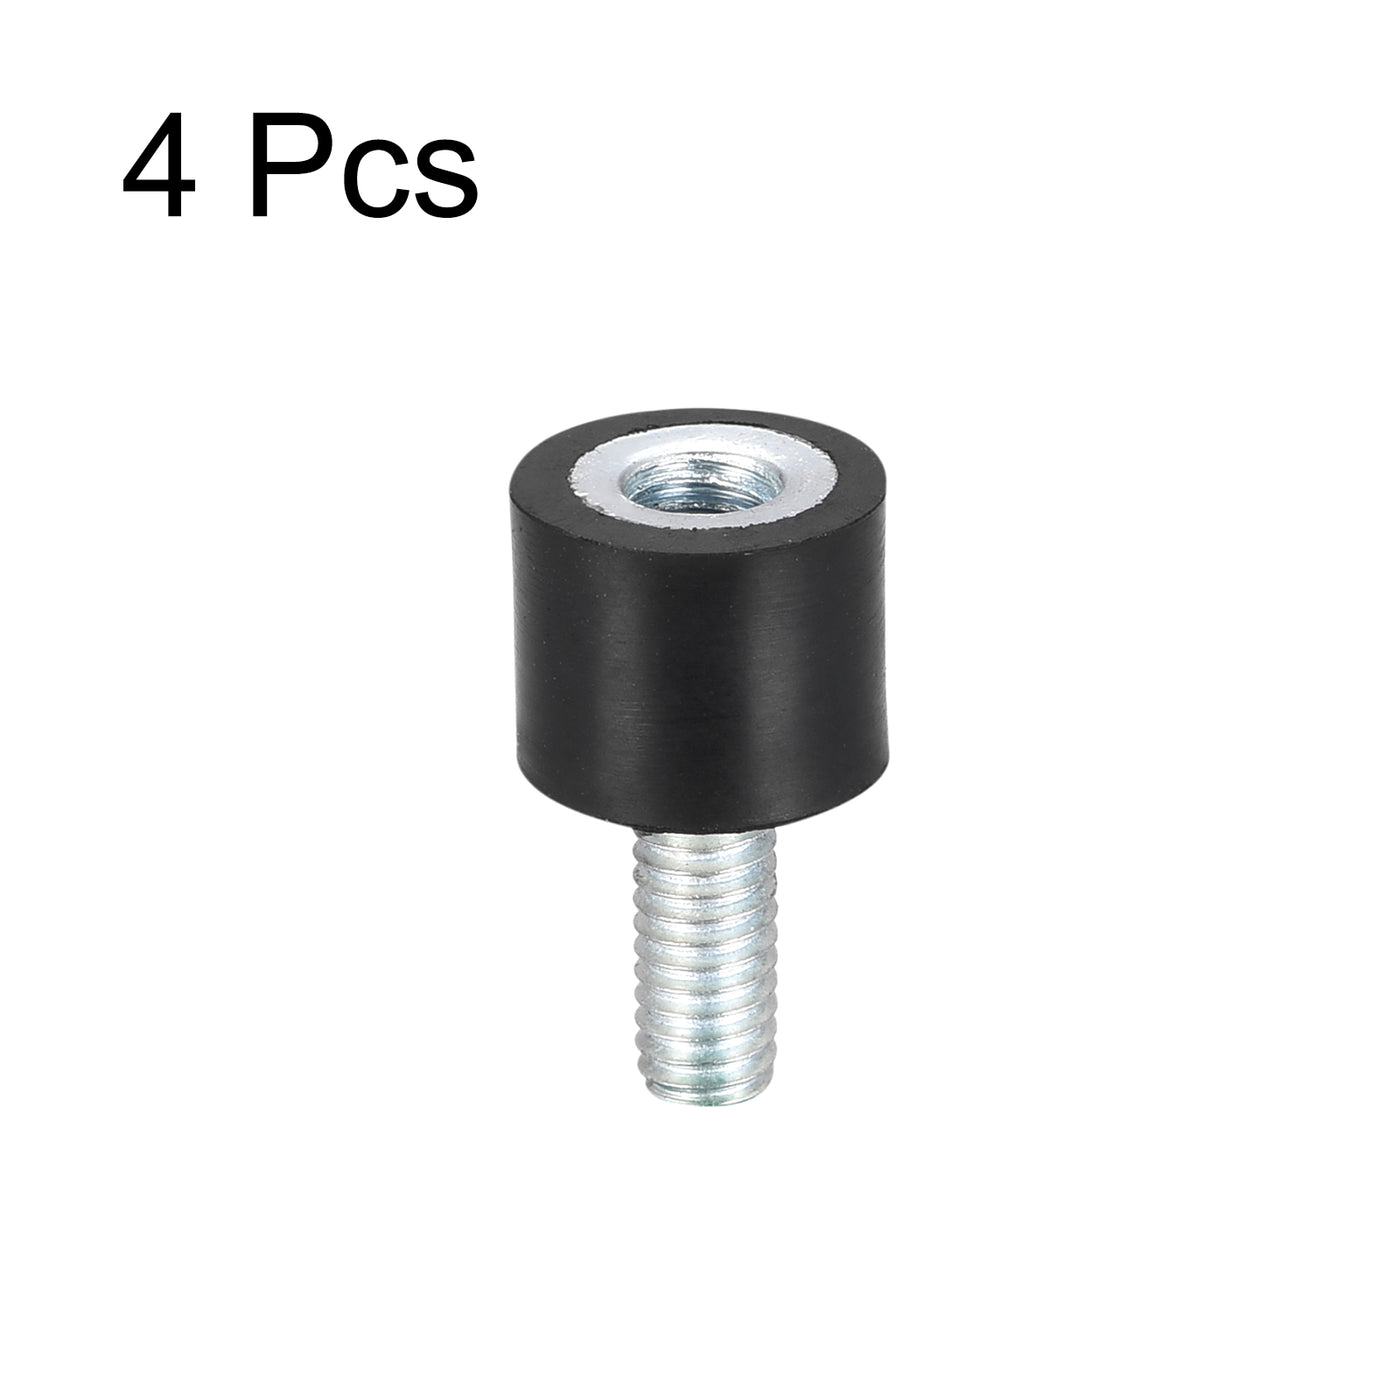 uxcell Uxcell Rubber Mount 4pcs M4 Male/Female Vibration Isolator Shock Absorber D10mmxH8mm